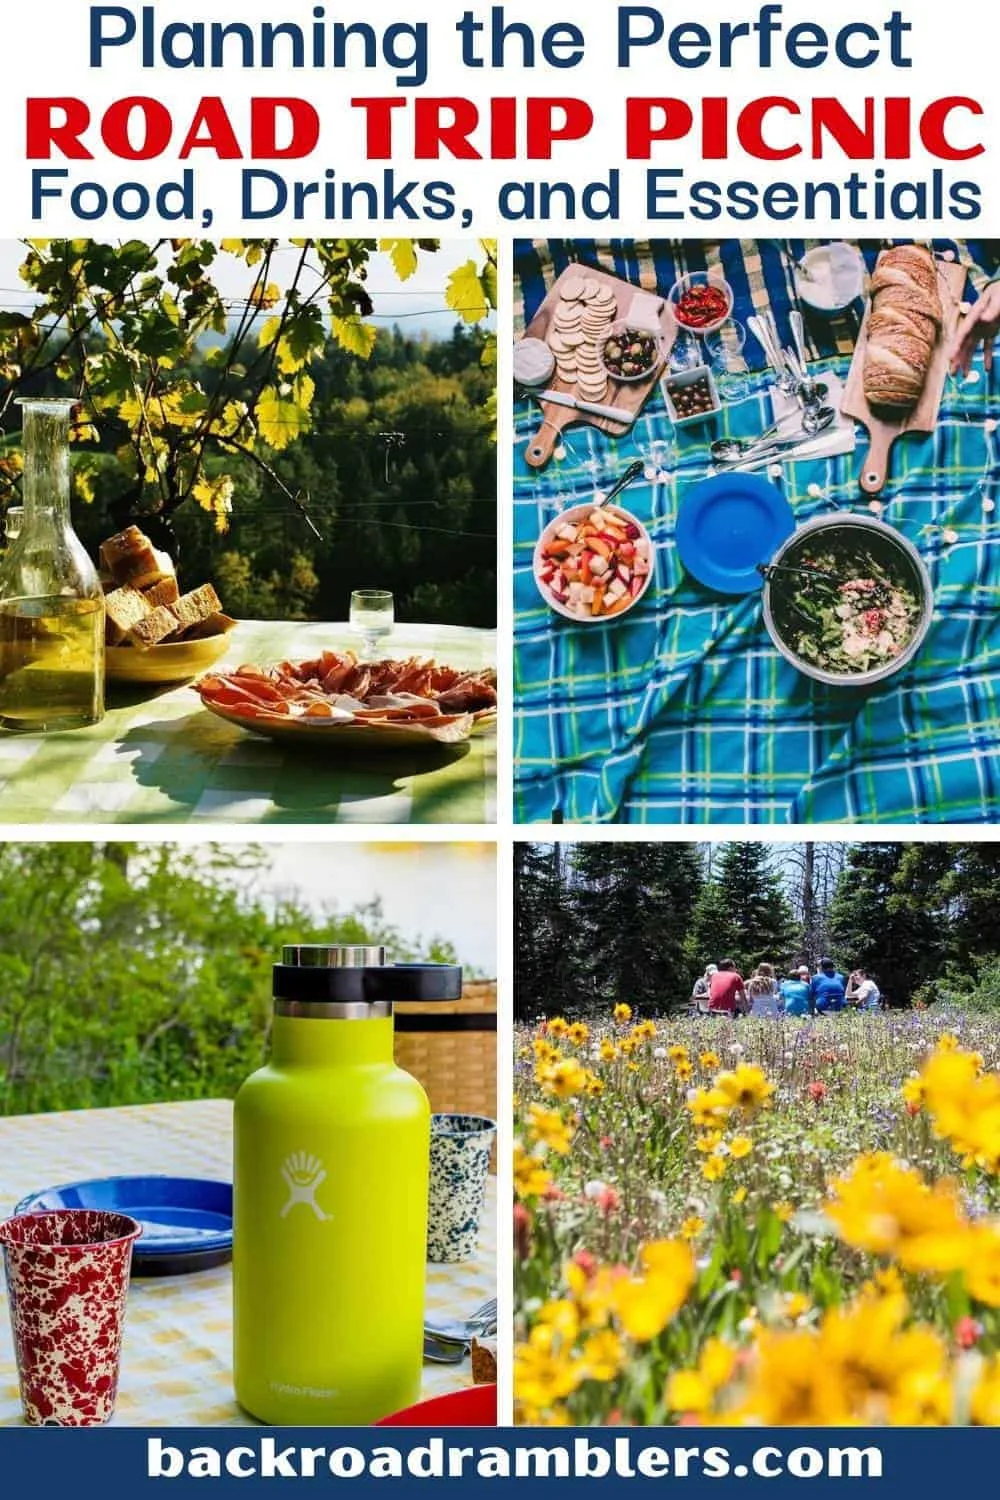 A collage of picnic photos. Text overlay: Planning the perfect road trip picnic - food, drinks, and essentials.